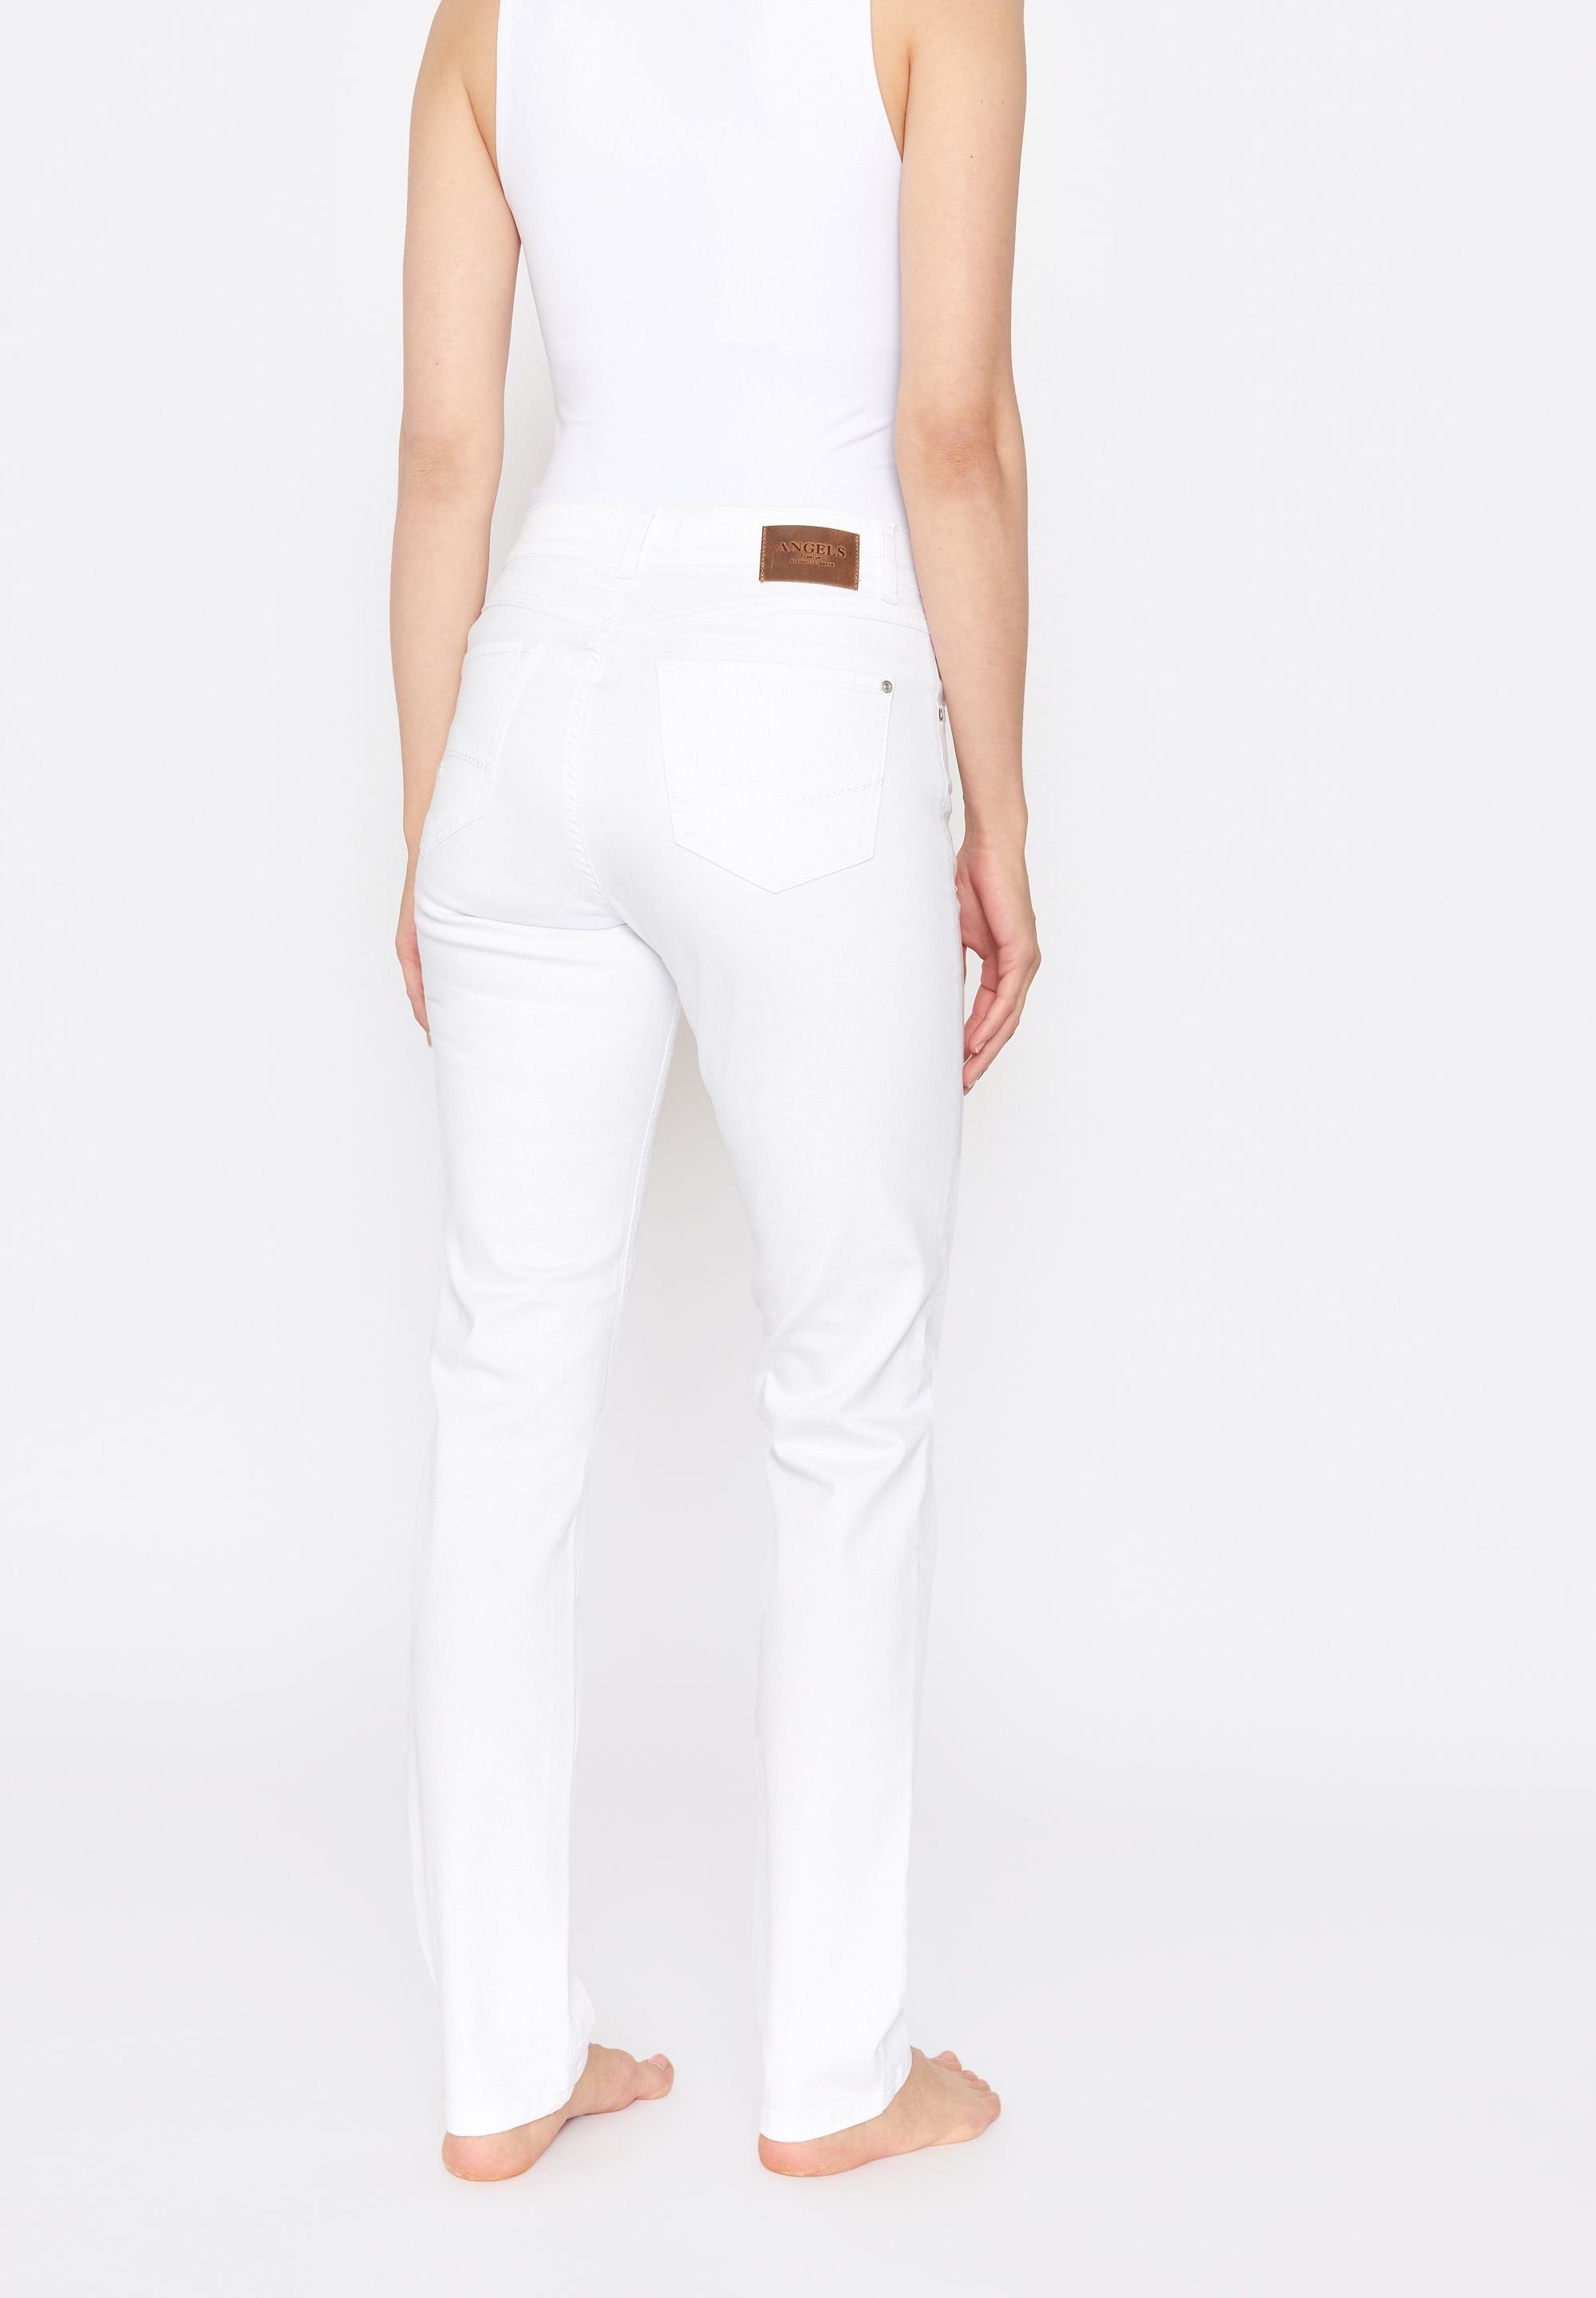 ANGELS Gerade Jeans white